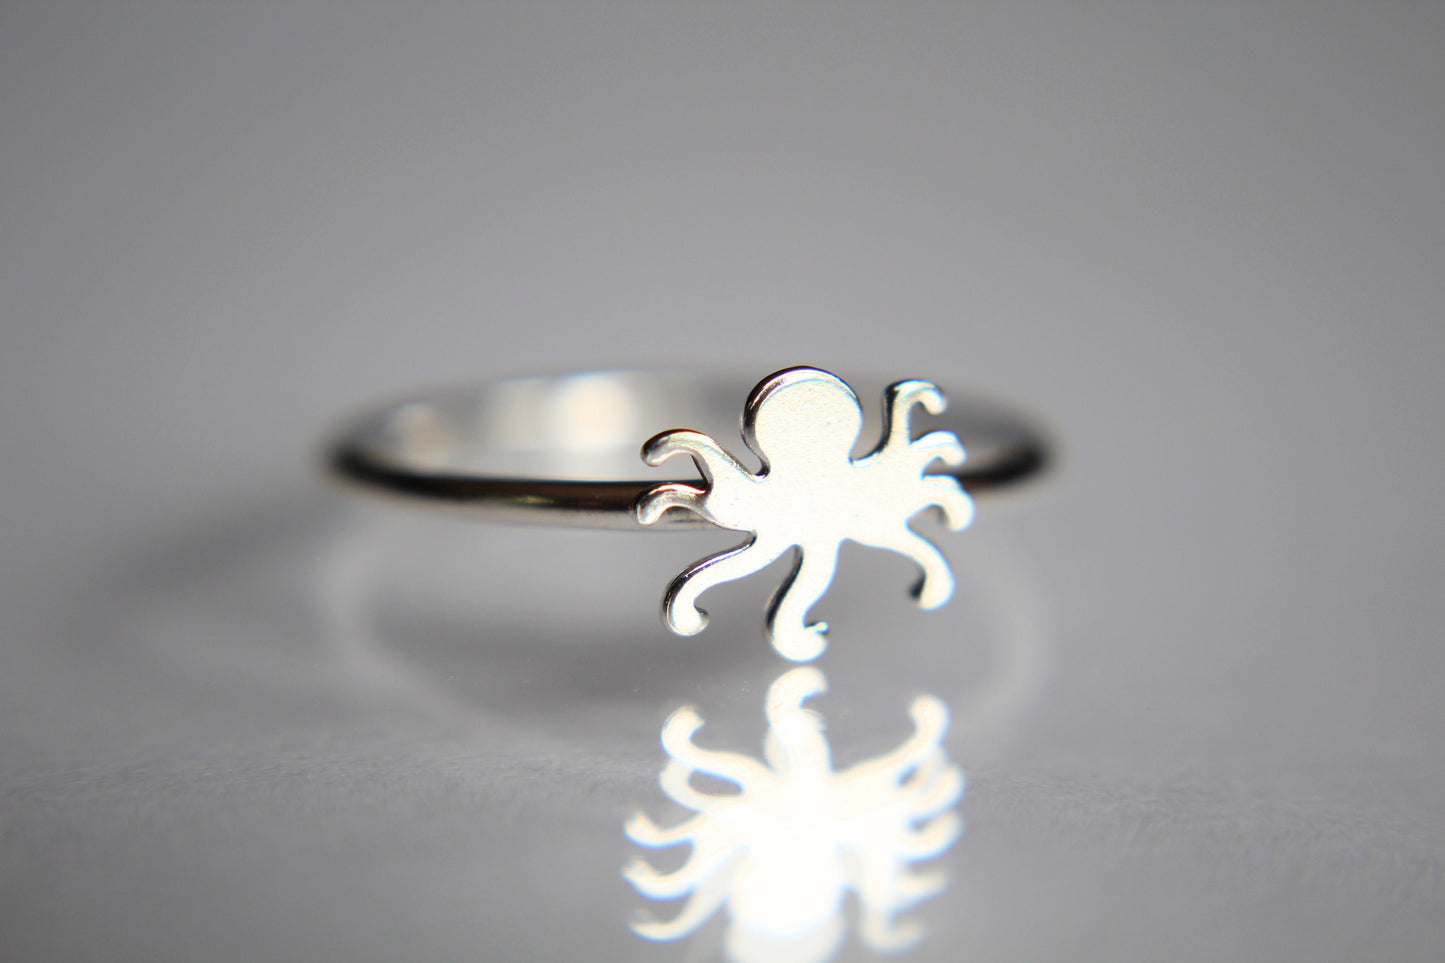 Octopus Ring, Sterling Silver Octopus Ring, Minimalistic Tiny Octopus Ring, cephalopod Jewelry, cephalopod Ring, Ocean Jewelry, gift